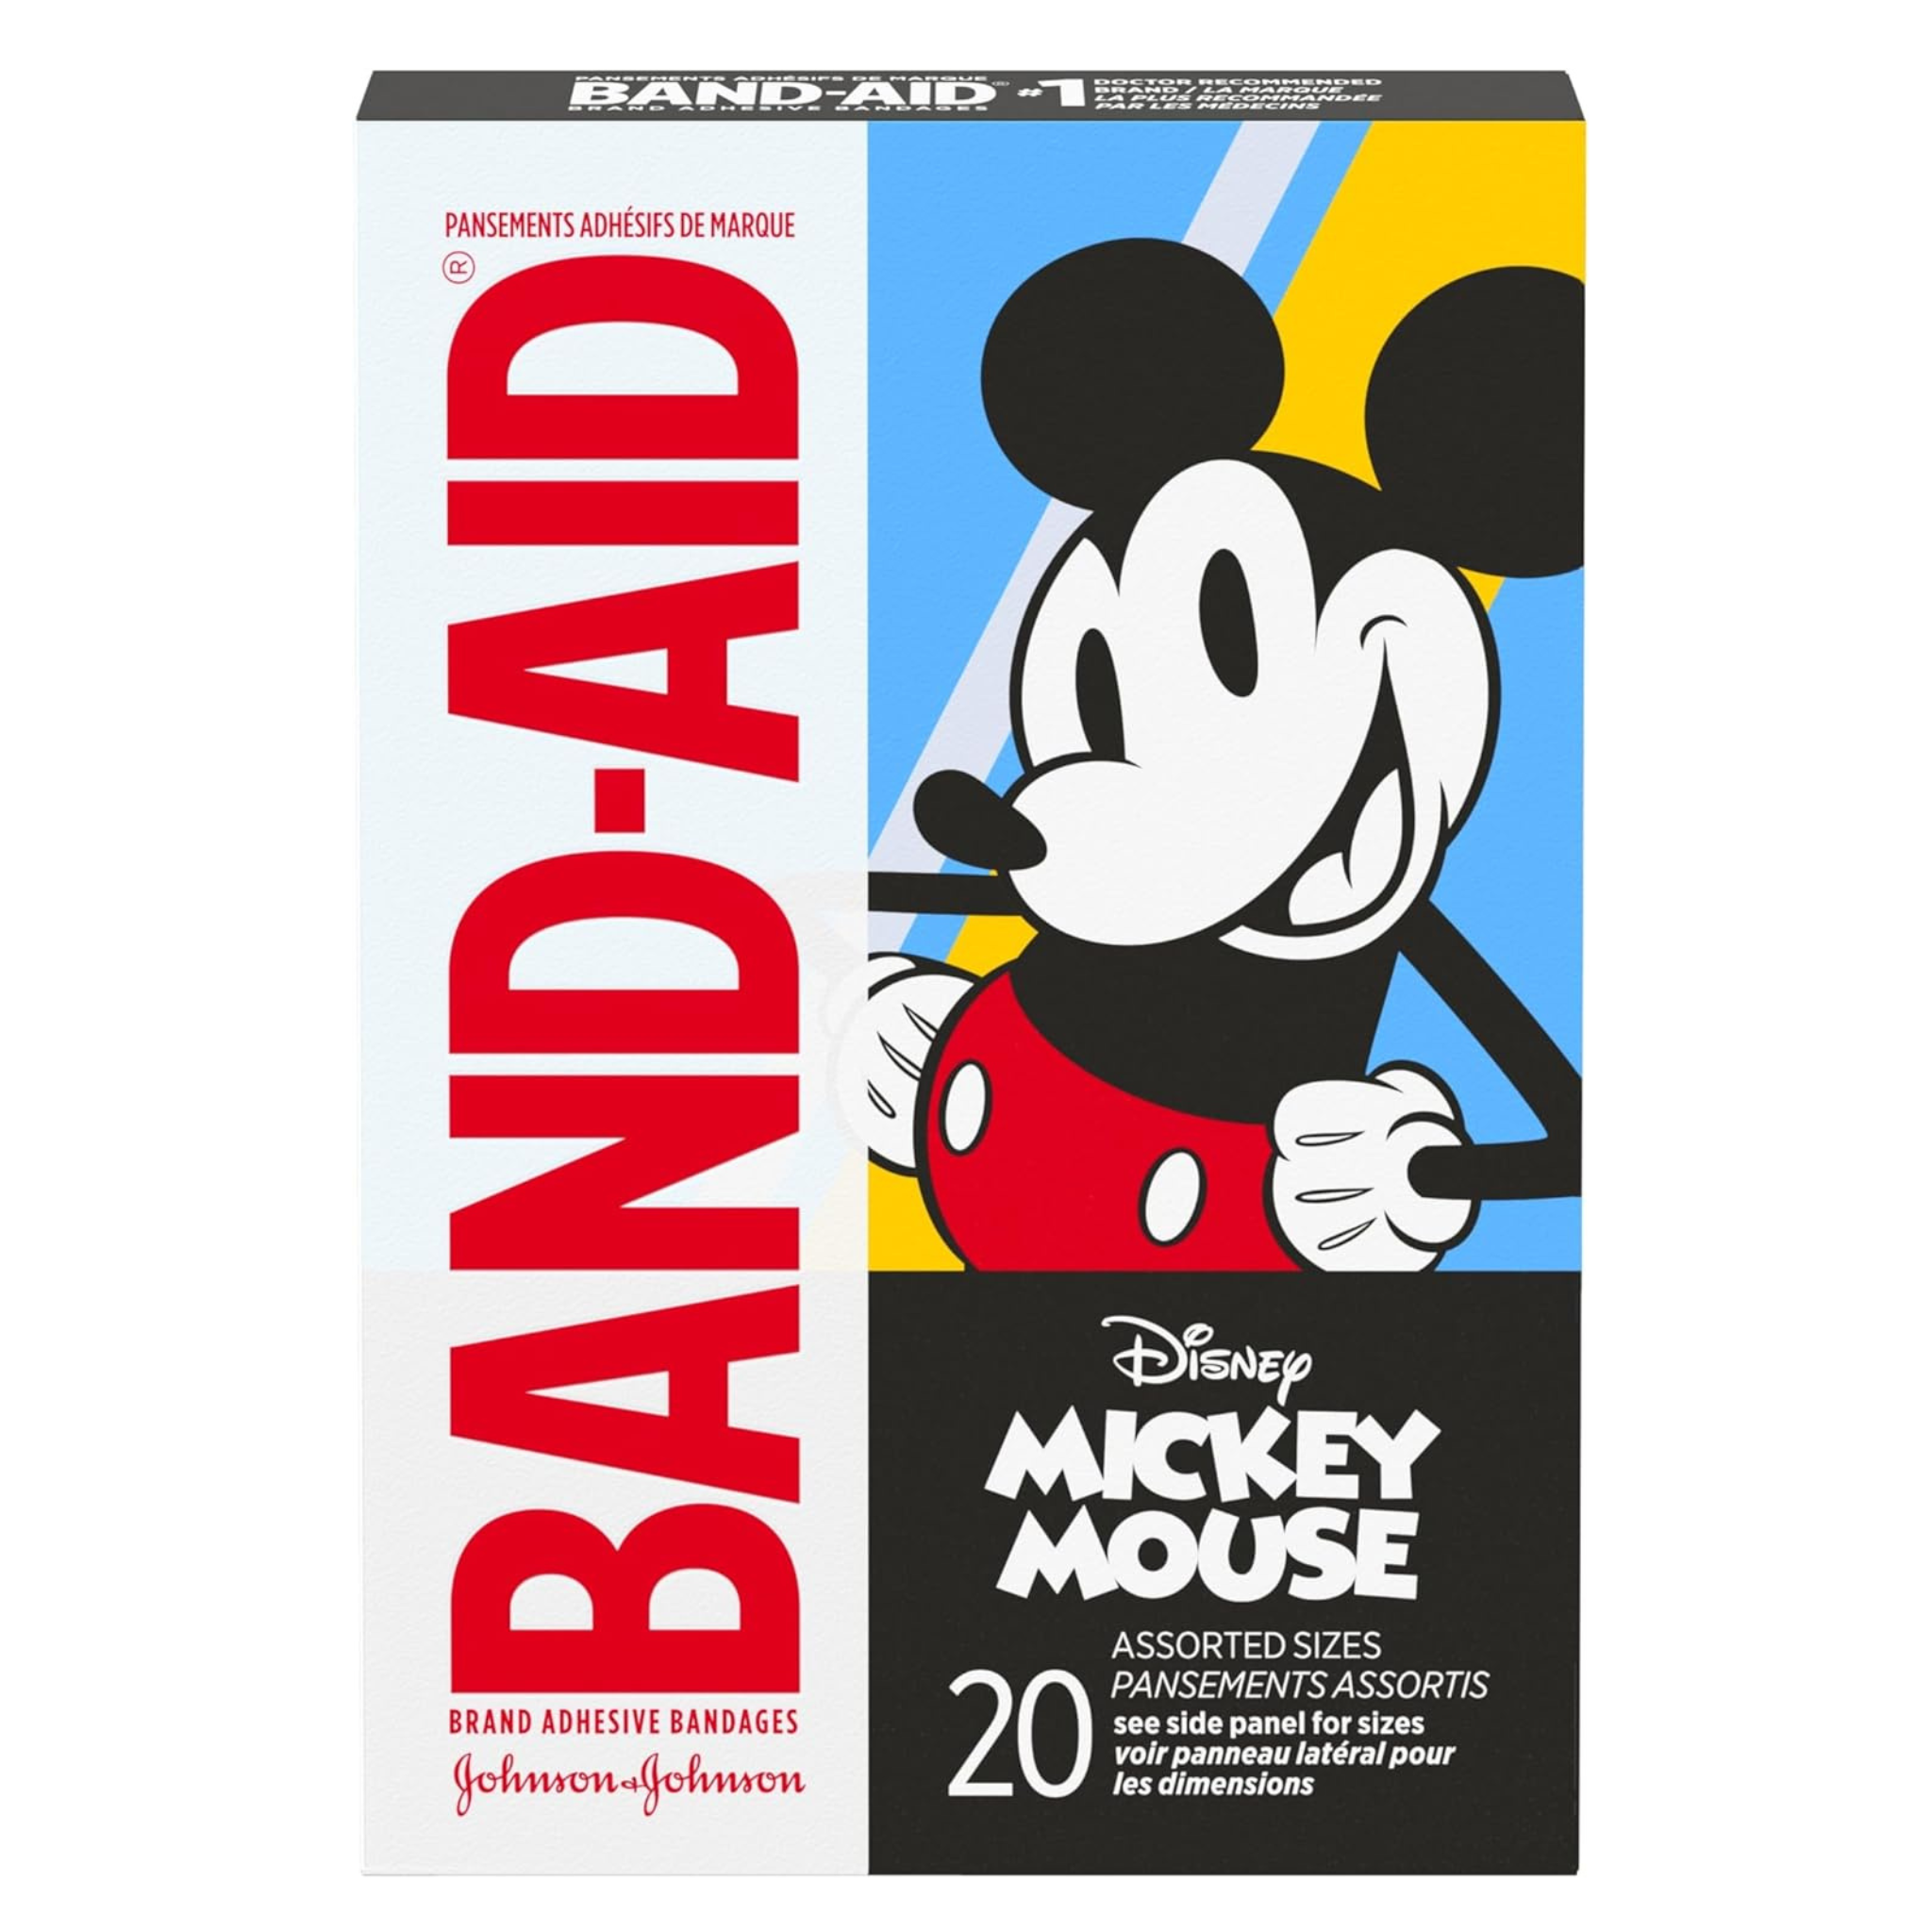 Band-Aid Brand Adhesive Bandages Featuring Disney’s Mickey Mouse, Assorted Sizes (20 Count)